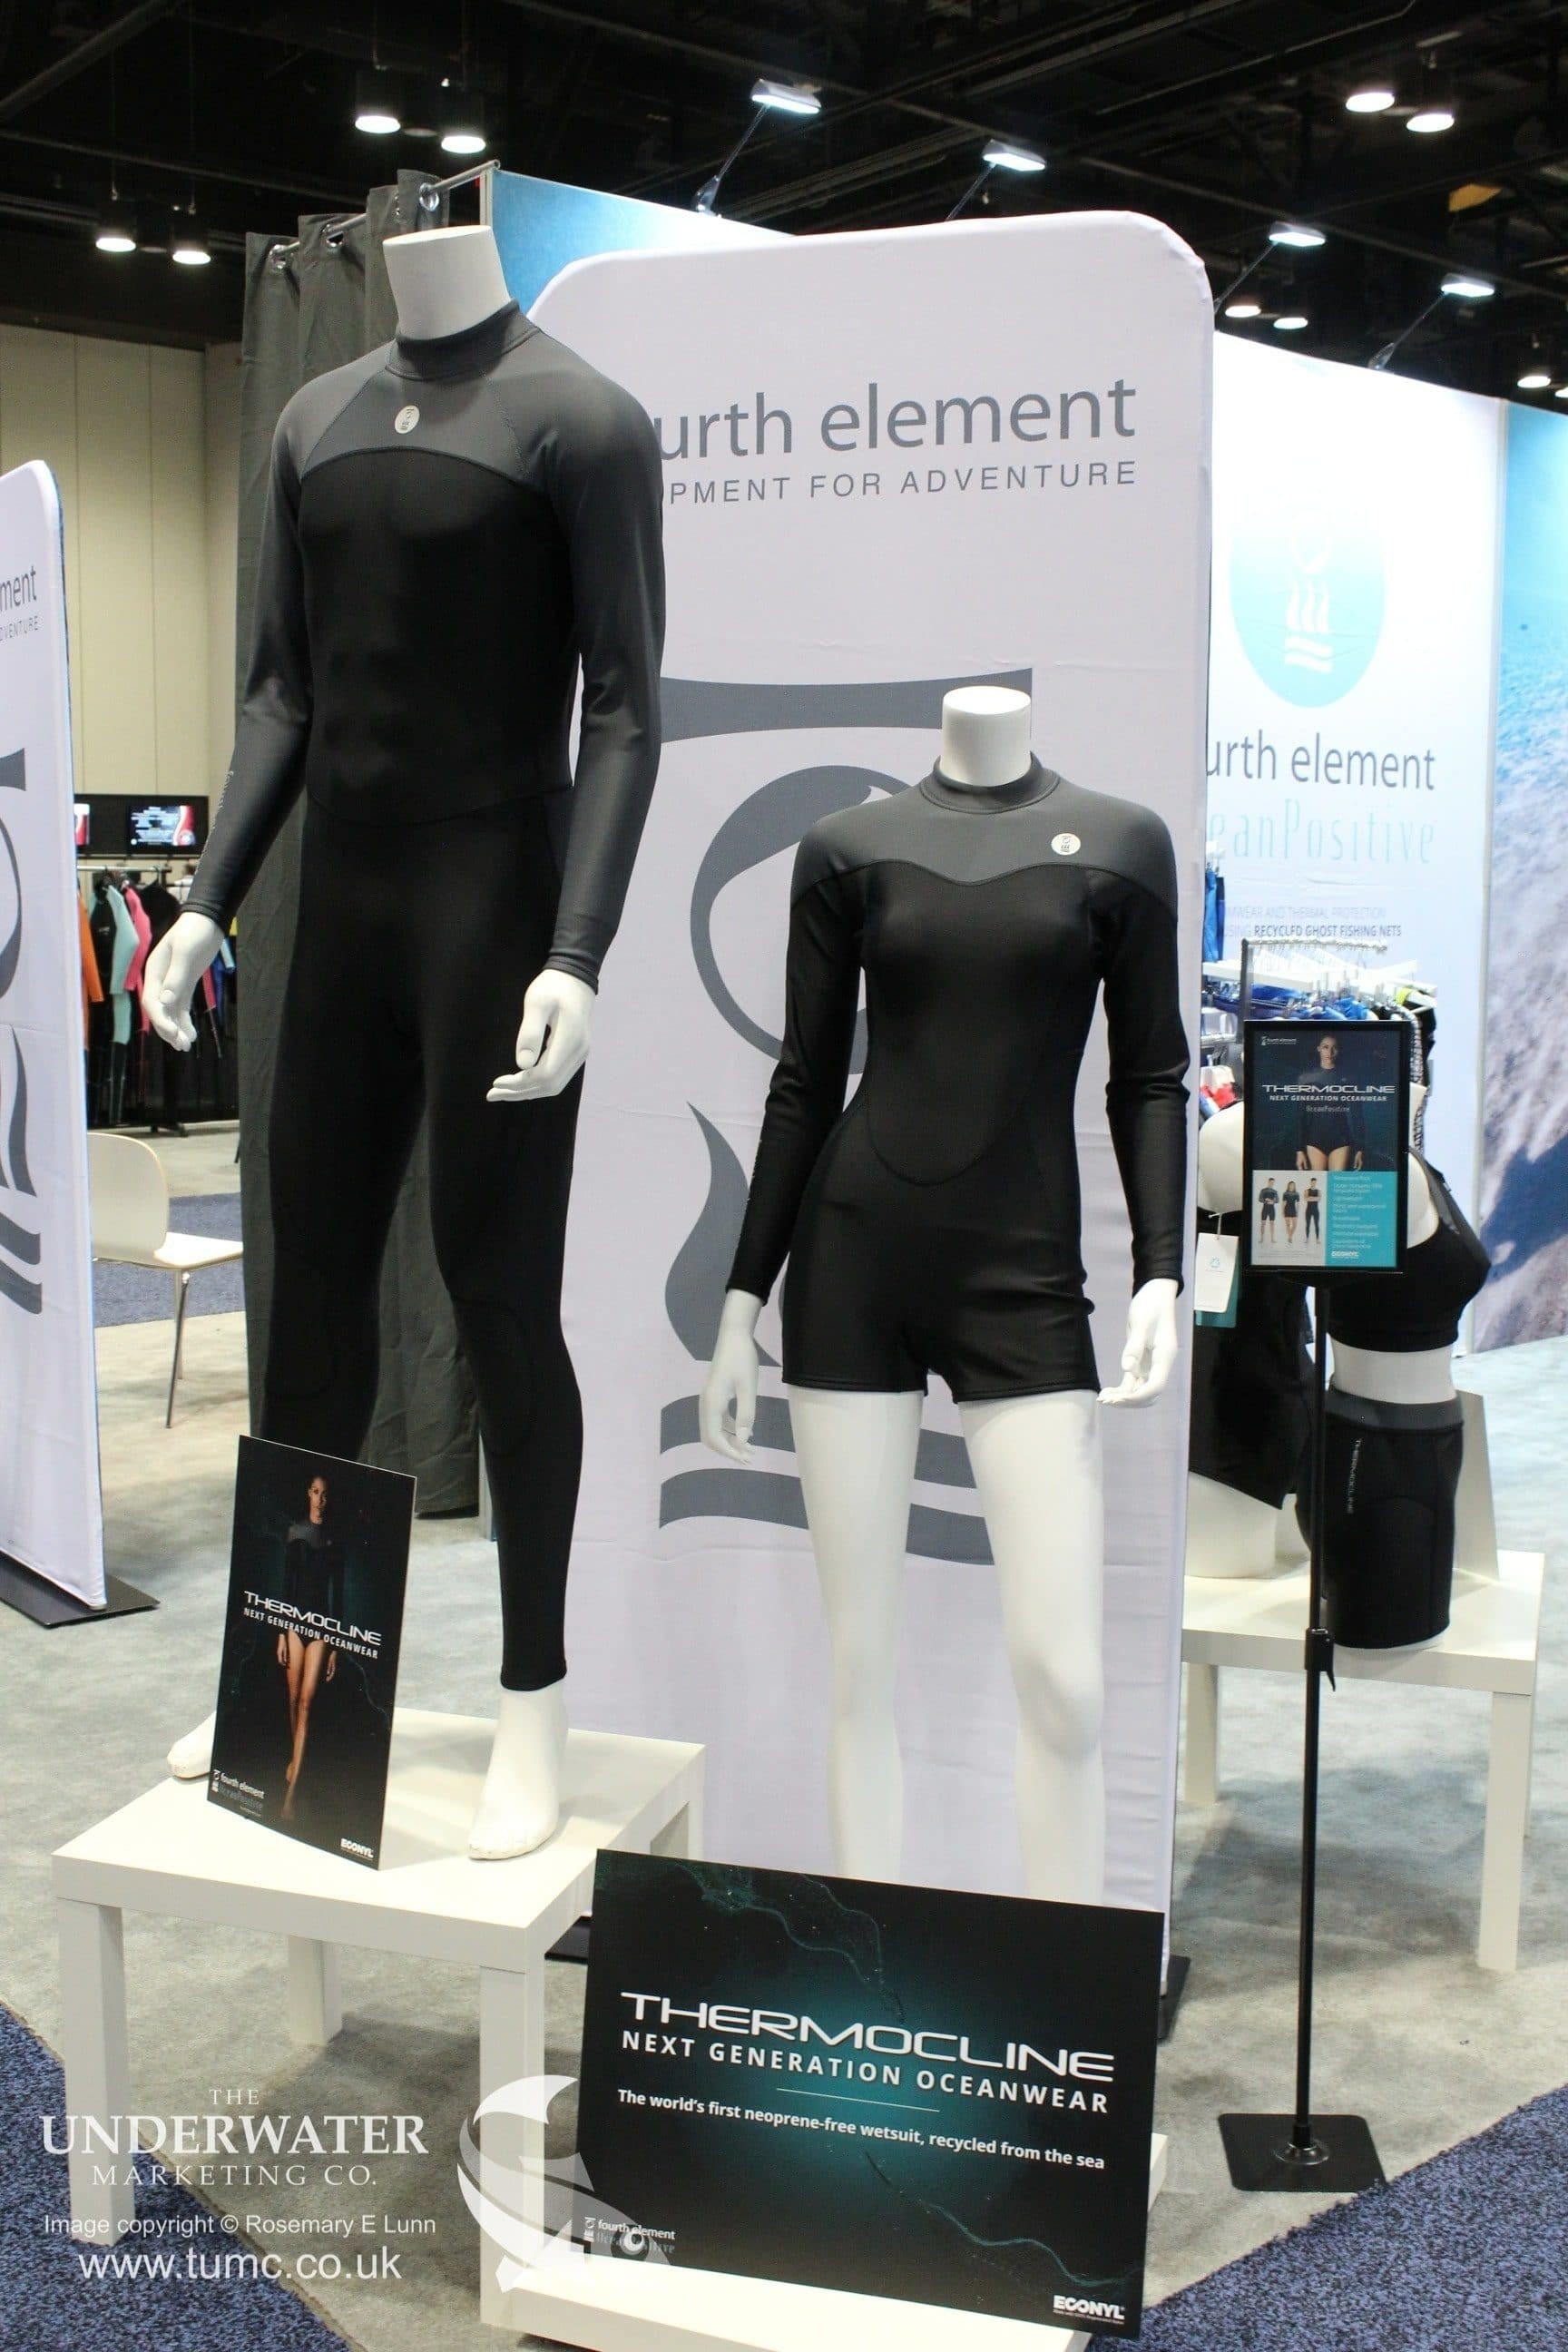 Fourth Element's Thermocline wetsuit is now fashioned to incorporate plastic from recycled post-consumer waste.